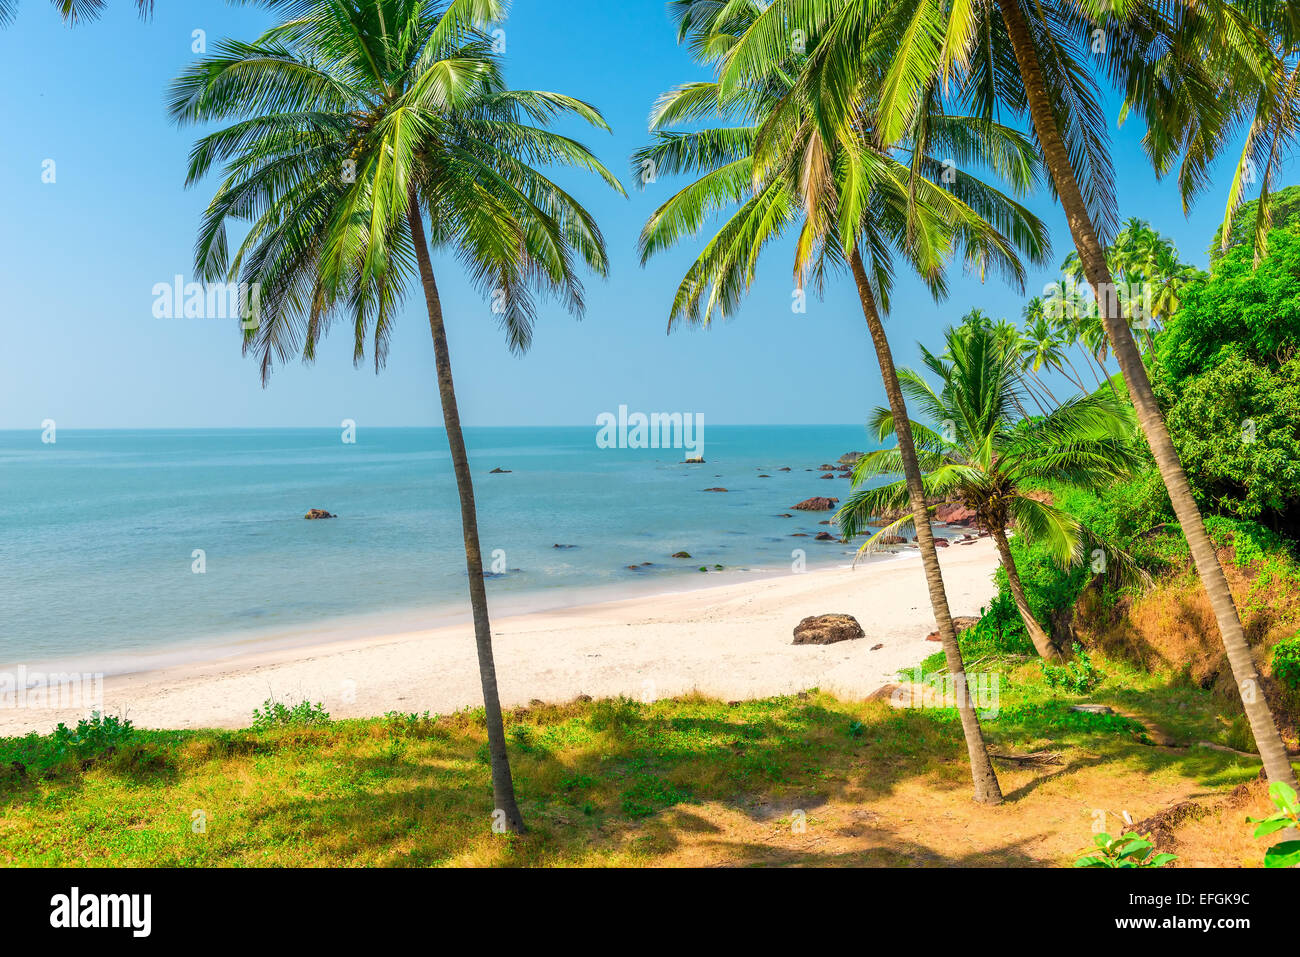 white sand beach and palm trees on a deserted island Stock Photo